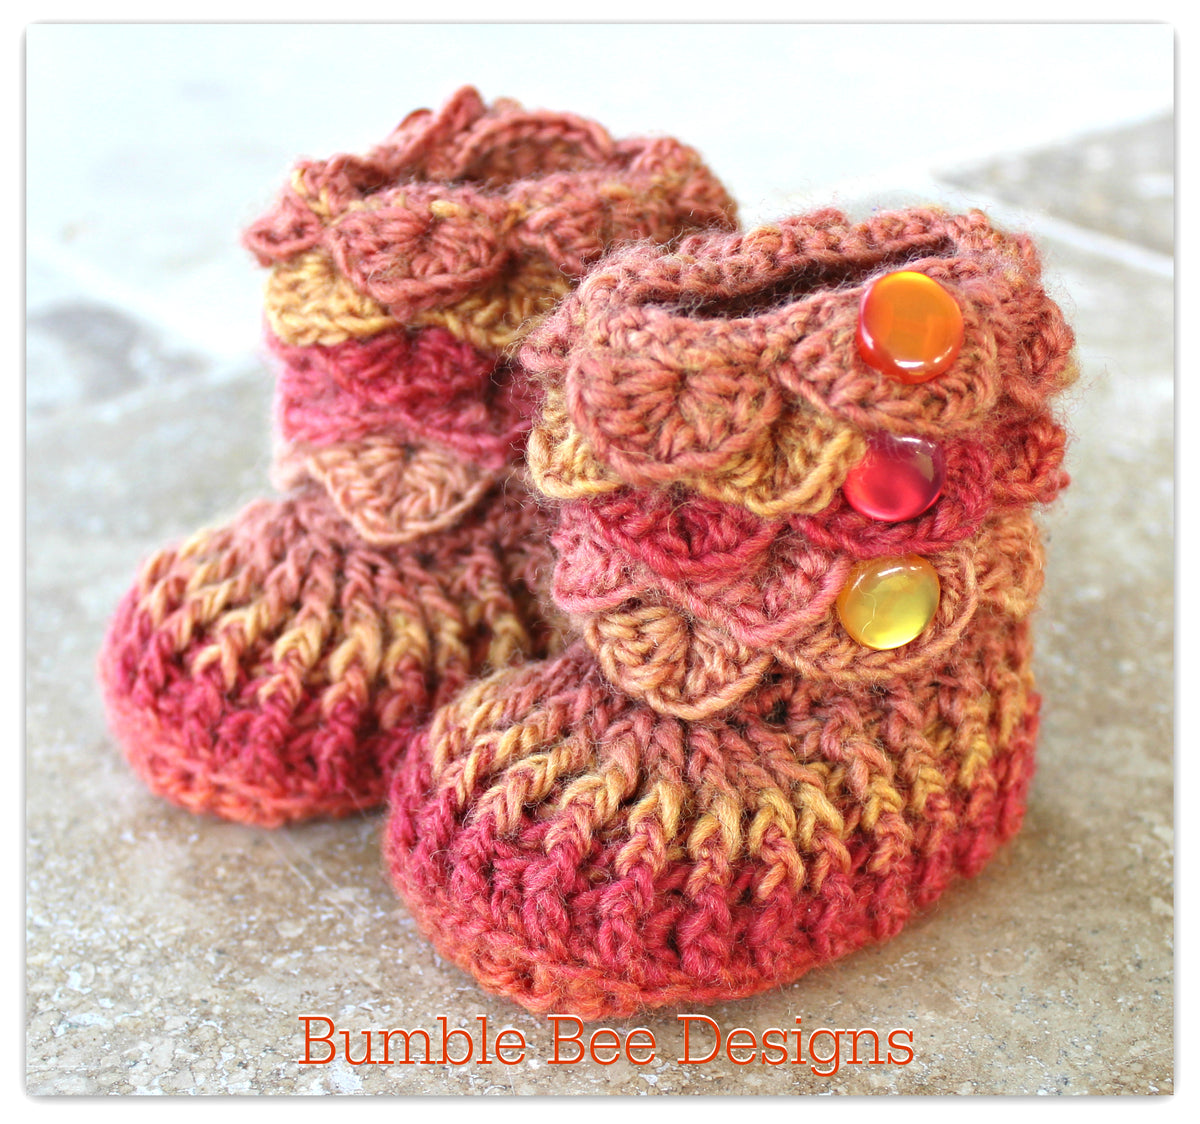 crocodile stitch baby booties that stay on, baby slippers, new baby gift, merino wool